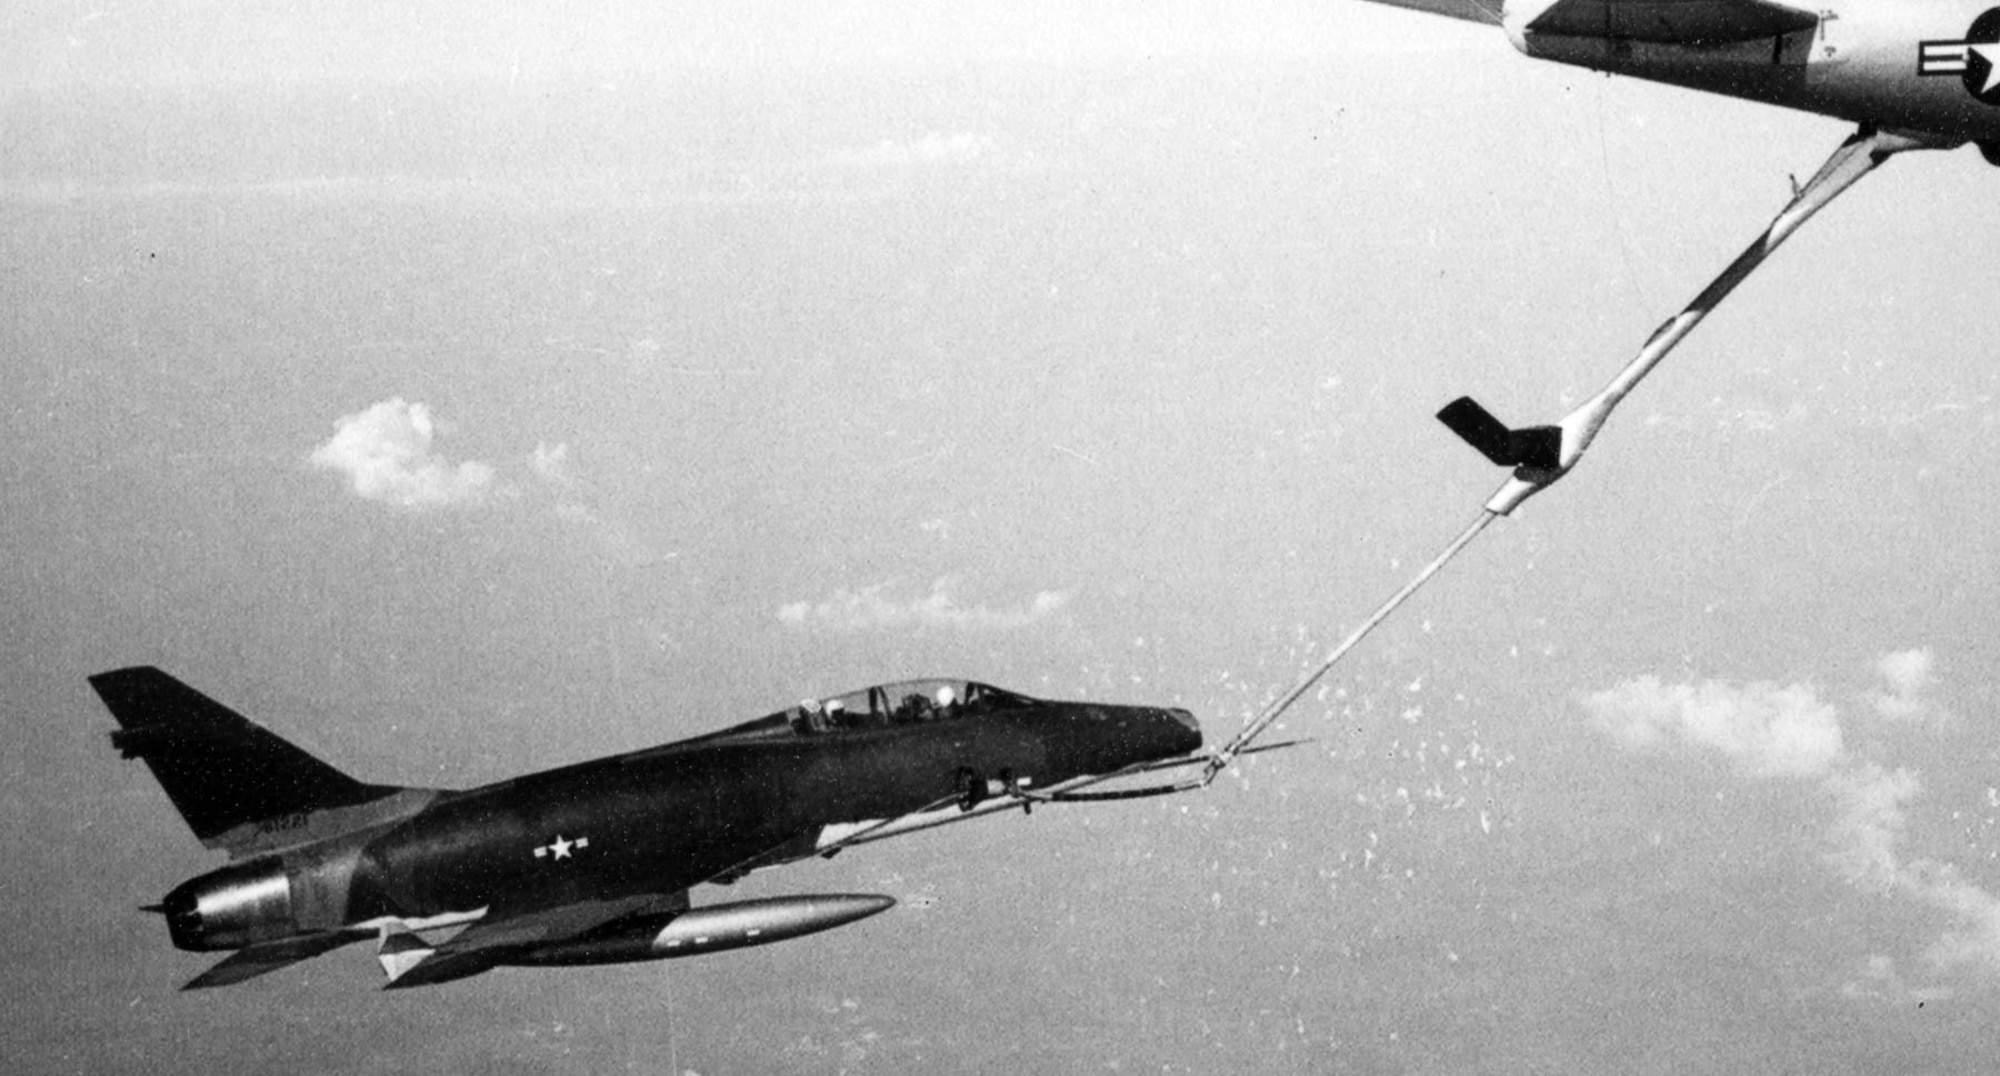 The F-100F’s air to air refueling system was different than that used by other USAF aircraft flying into North Vietnam, complicating aerial tanker scheduling. (U.S. Air Force photo)